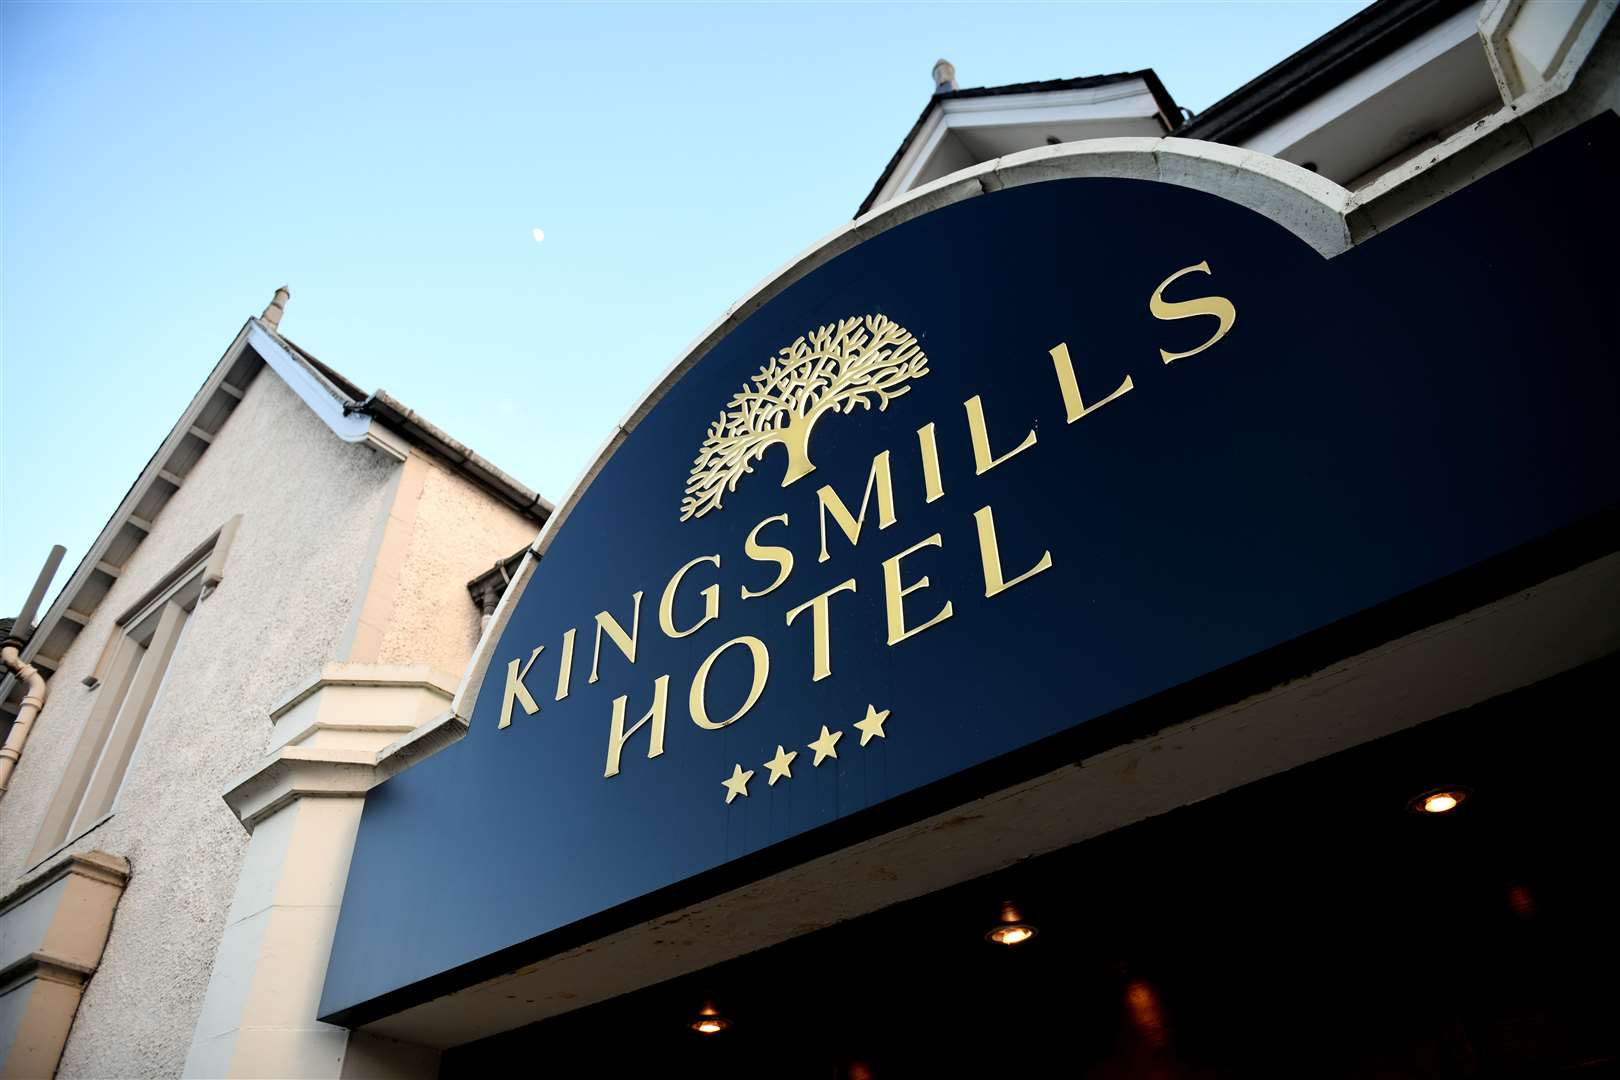 A consultation event will take place at the Kingsmills Hotel in Inverness. Picture: James Mackenzie.